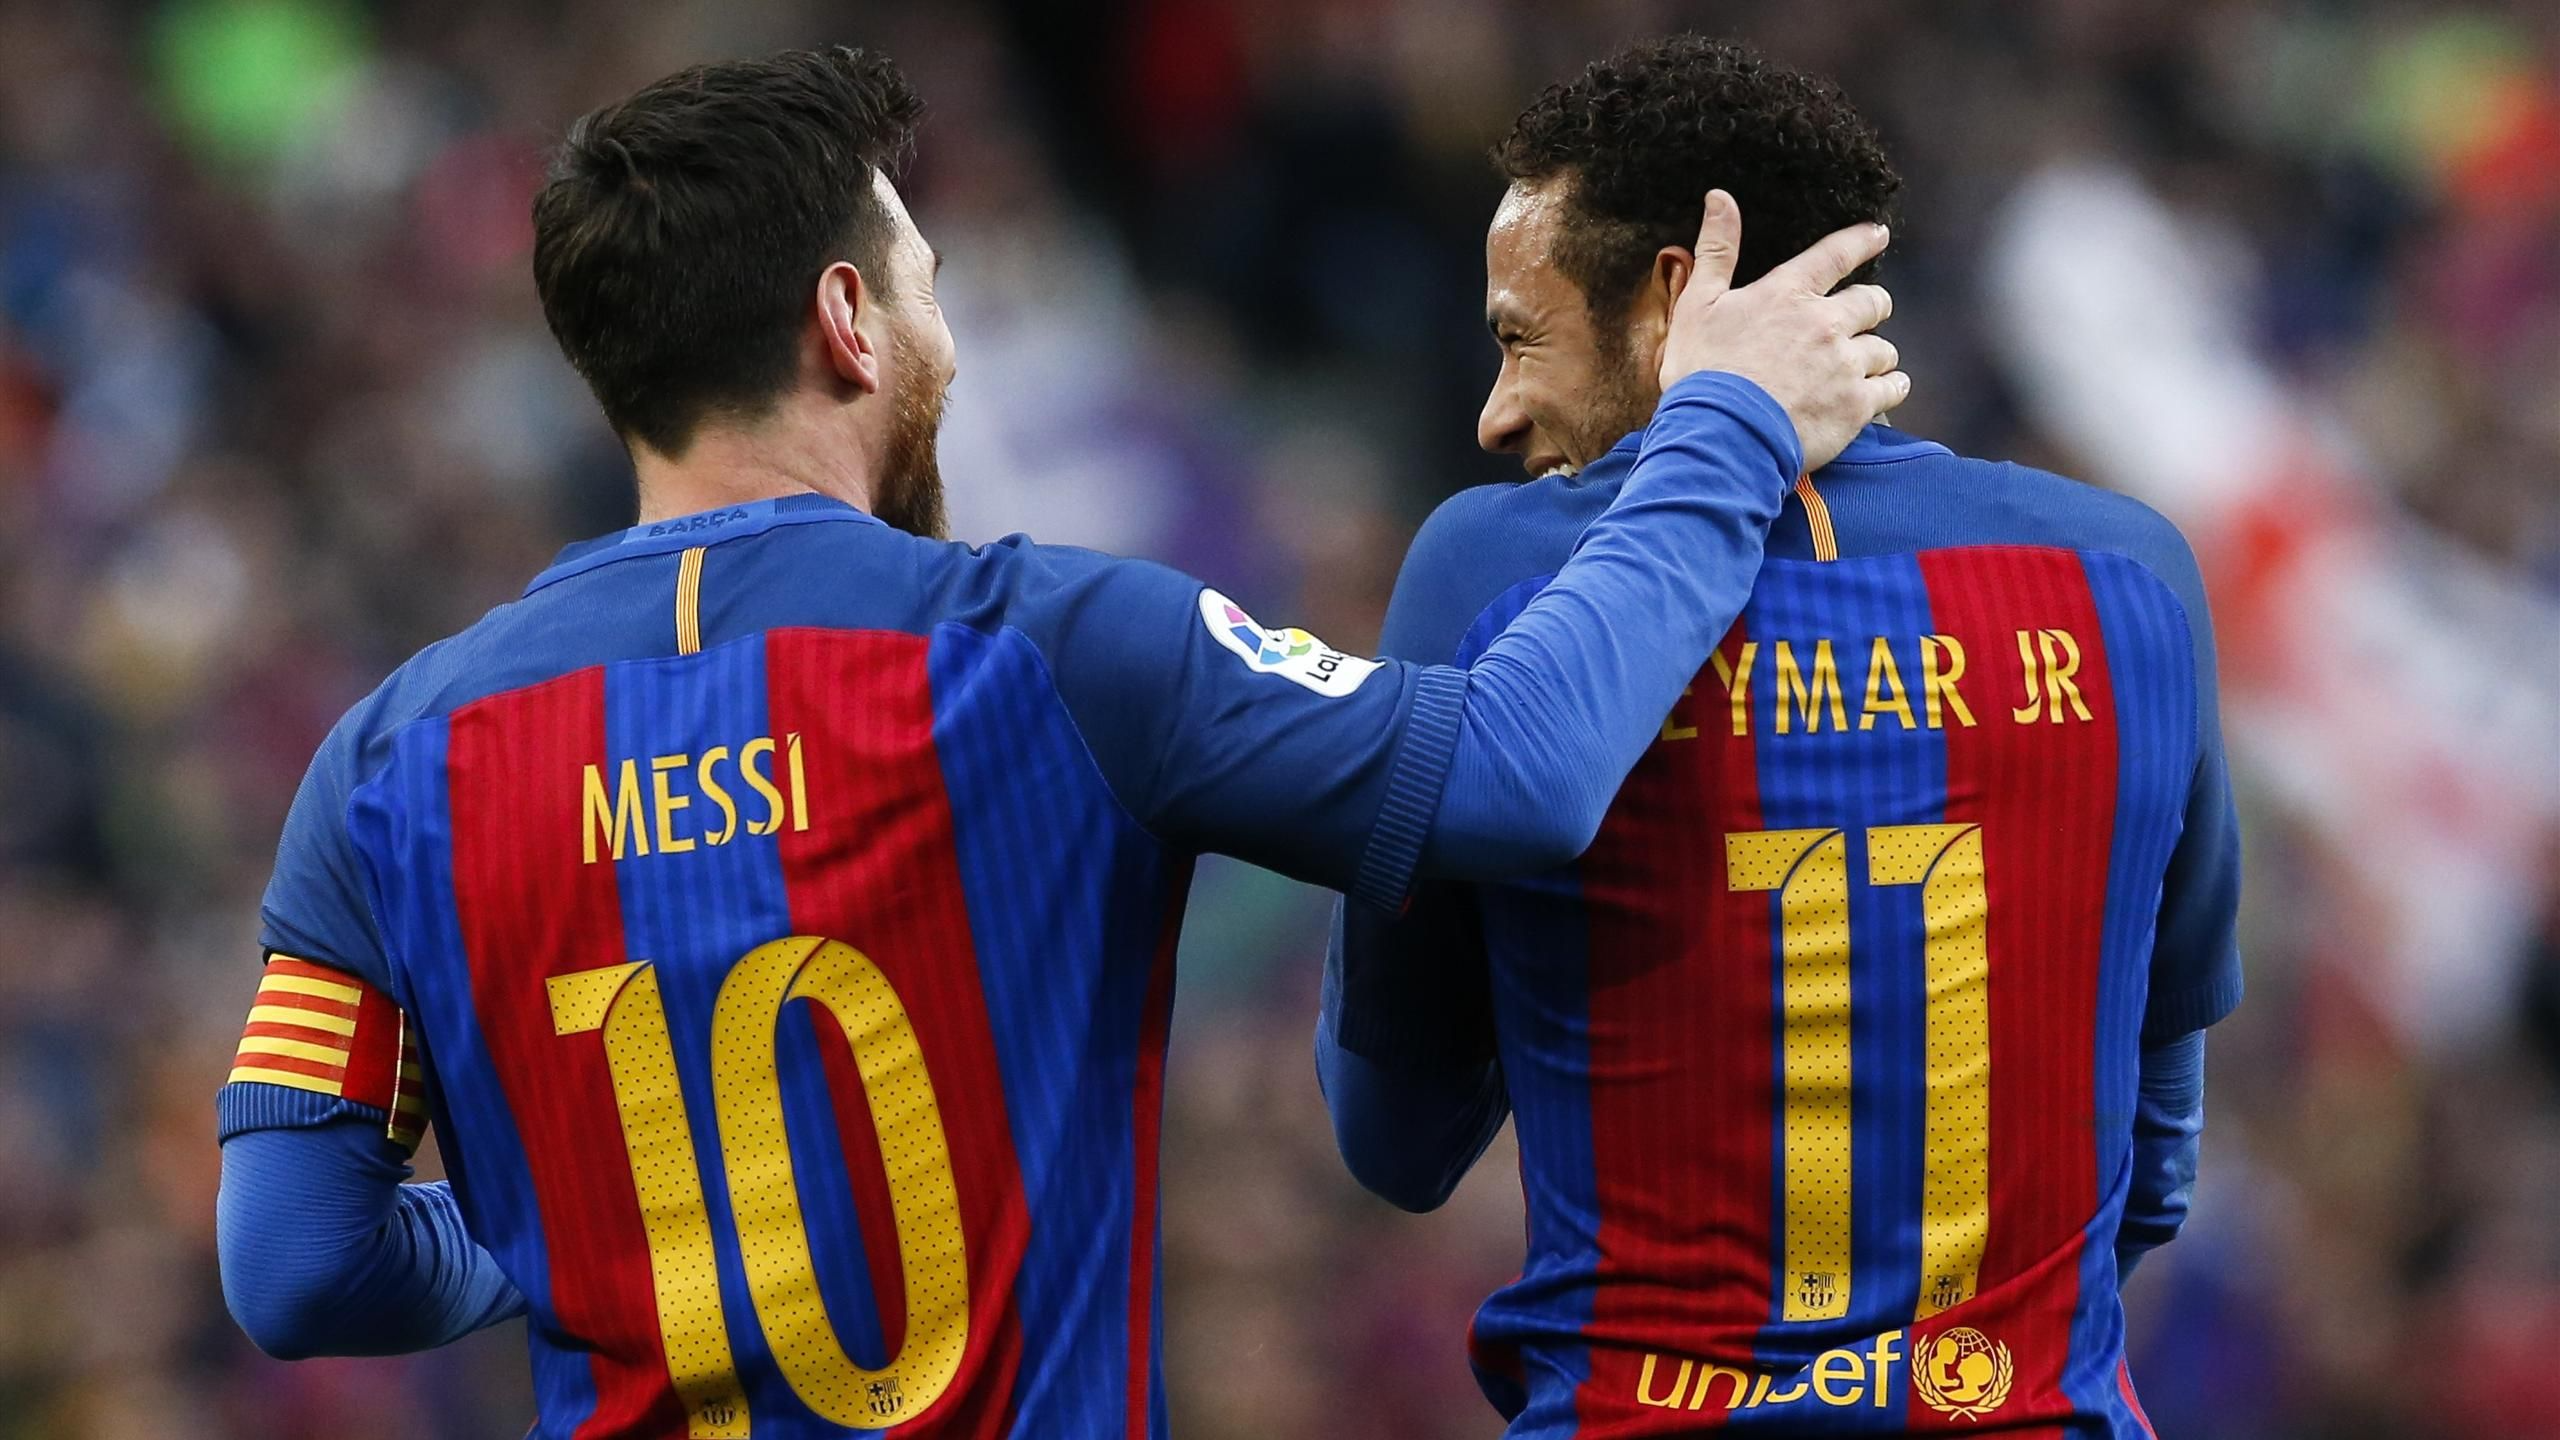 Messi Expresses Support For Injured Neymar